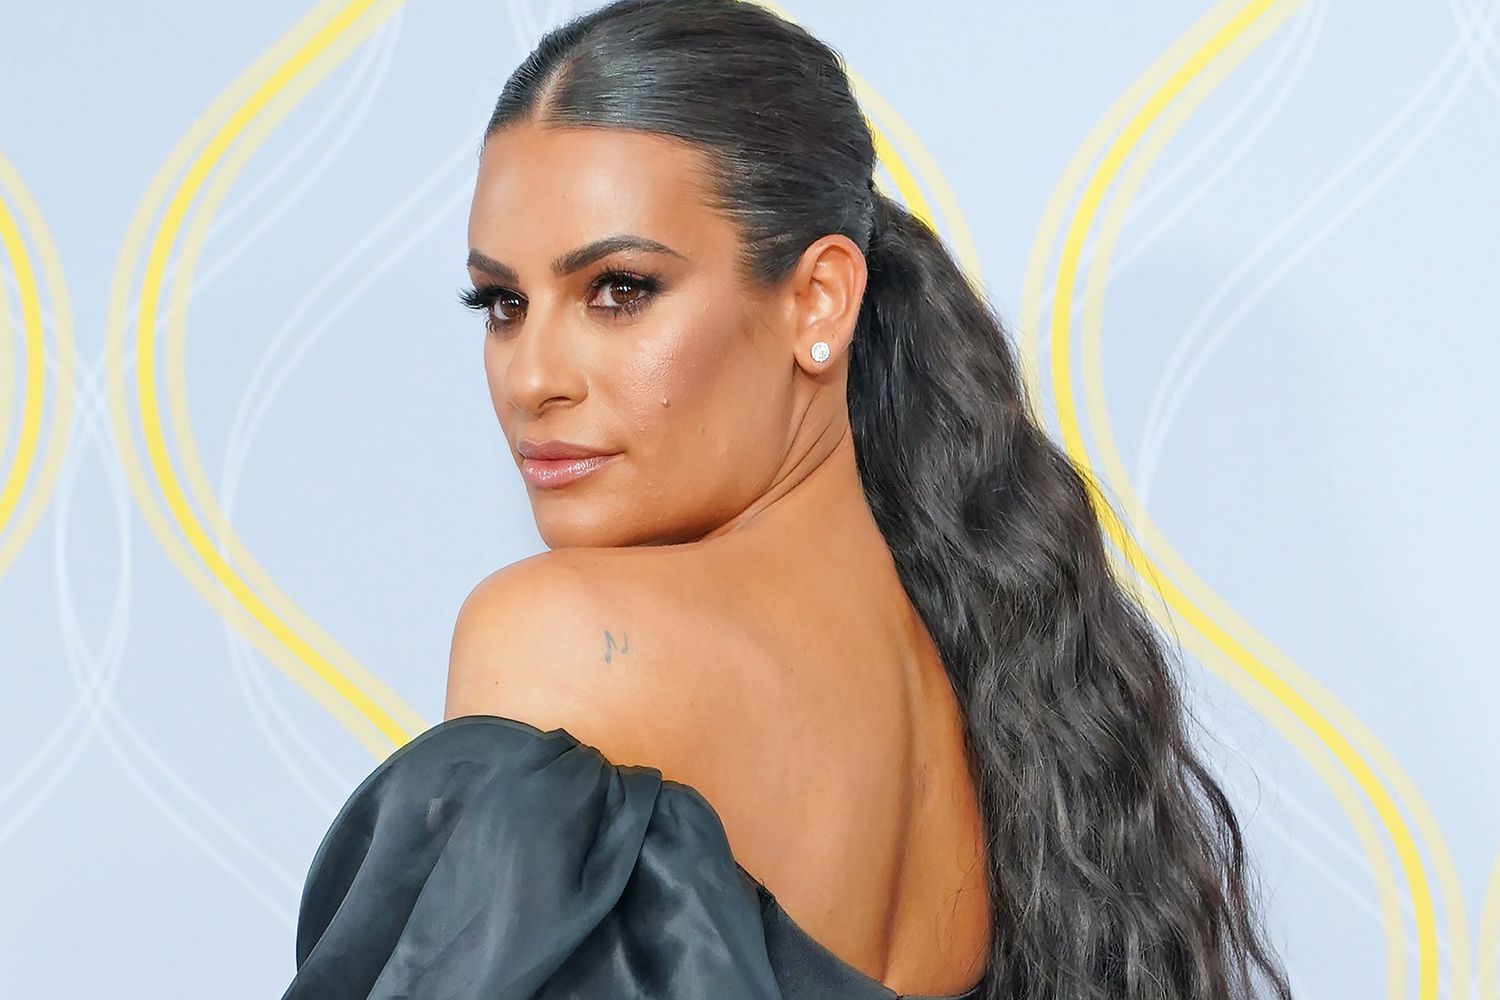 NEW YORK, NY - JUNE 12: Lea Michele attends The 75th Annual Tony Awards - Arrivals on June 12, 2022 at Radio City Music Hall in New York City. (Photo by Sean Zanni/Patrick McMullan via Getty Images)